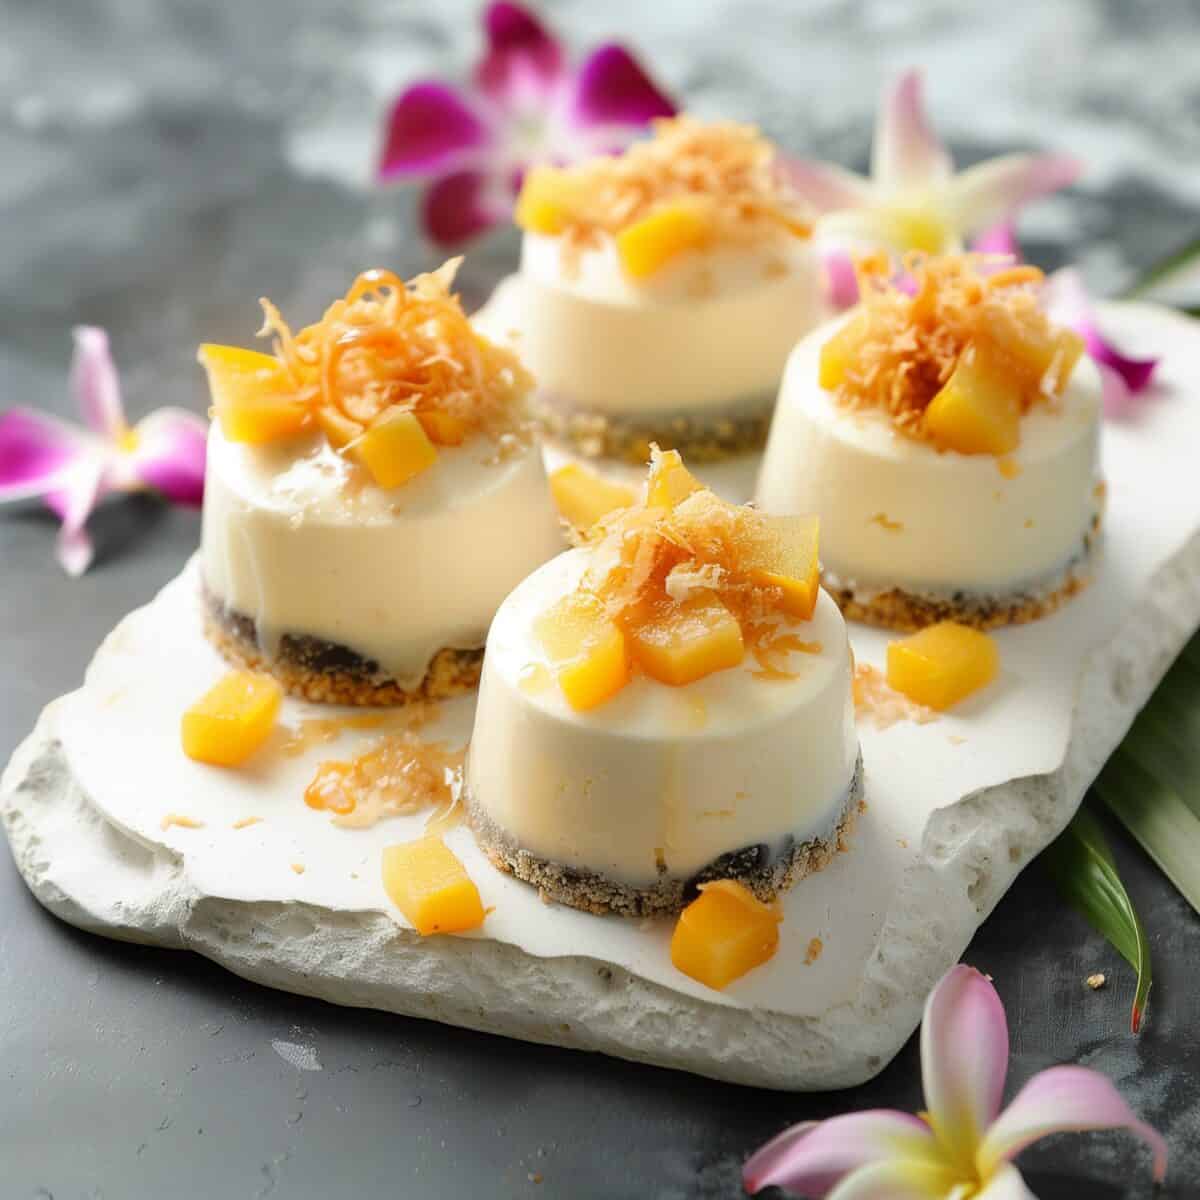 Elegant mini desserts with a creamy white top, mango cubes, and toasted coconut flakes on a dark cookie crumb base, garnished with tropical flowers, symbolizing an exquisite Hawaiian sweet treat.